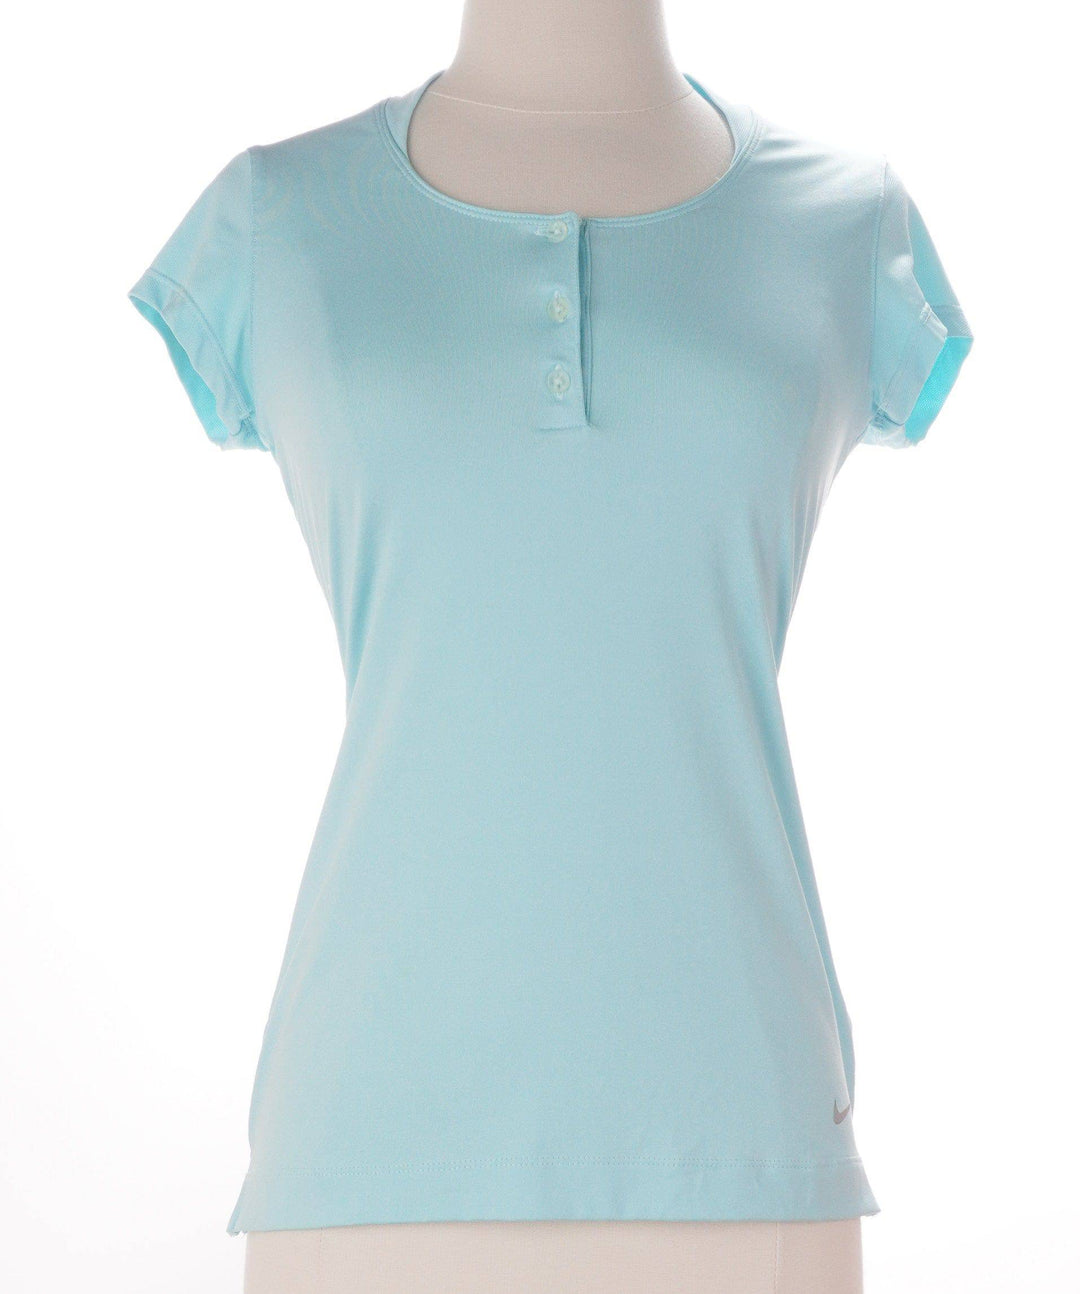 Nike Golf Baby Blue / Extra Small / Consigned Nike Golf Short Sleeve Top - Baby Blue - Size Extra Small